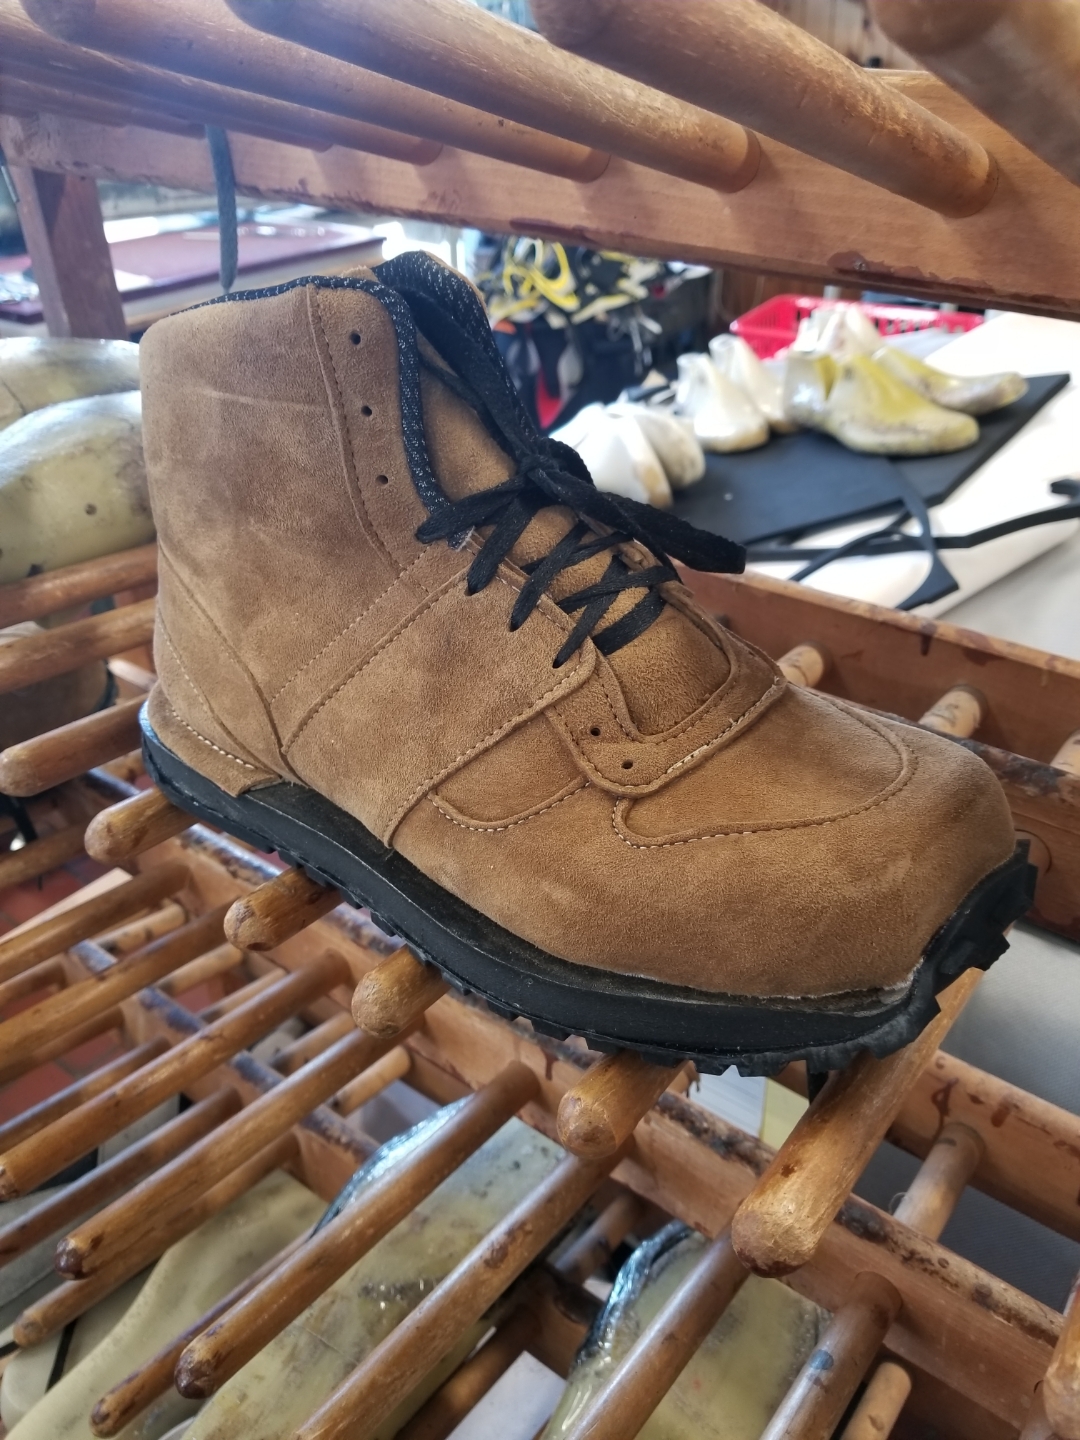 Buy > bespoke hiking boots > in stock